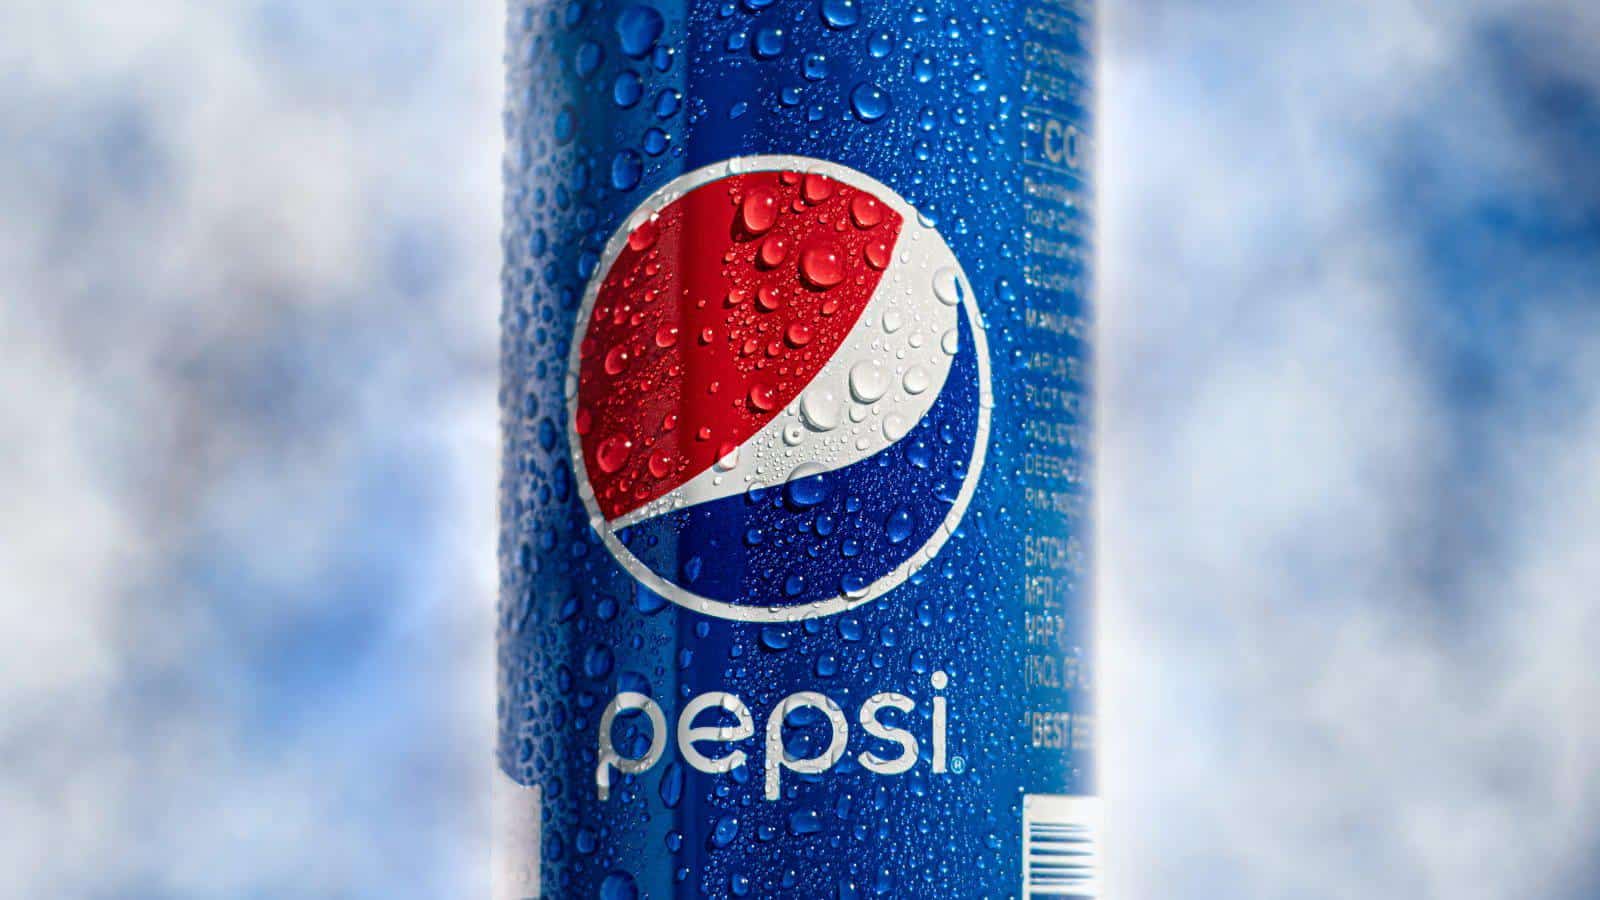 Pepsi Bottling Ventures suffers data breach after malware attack